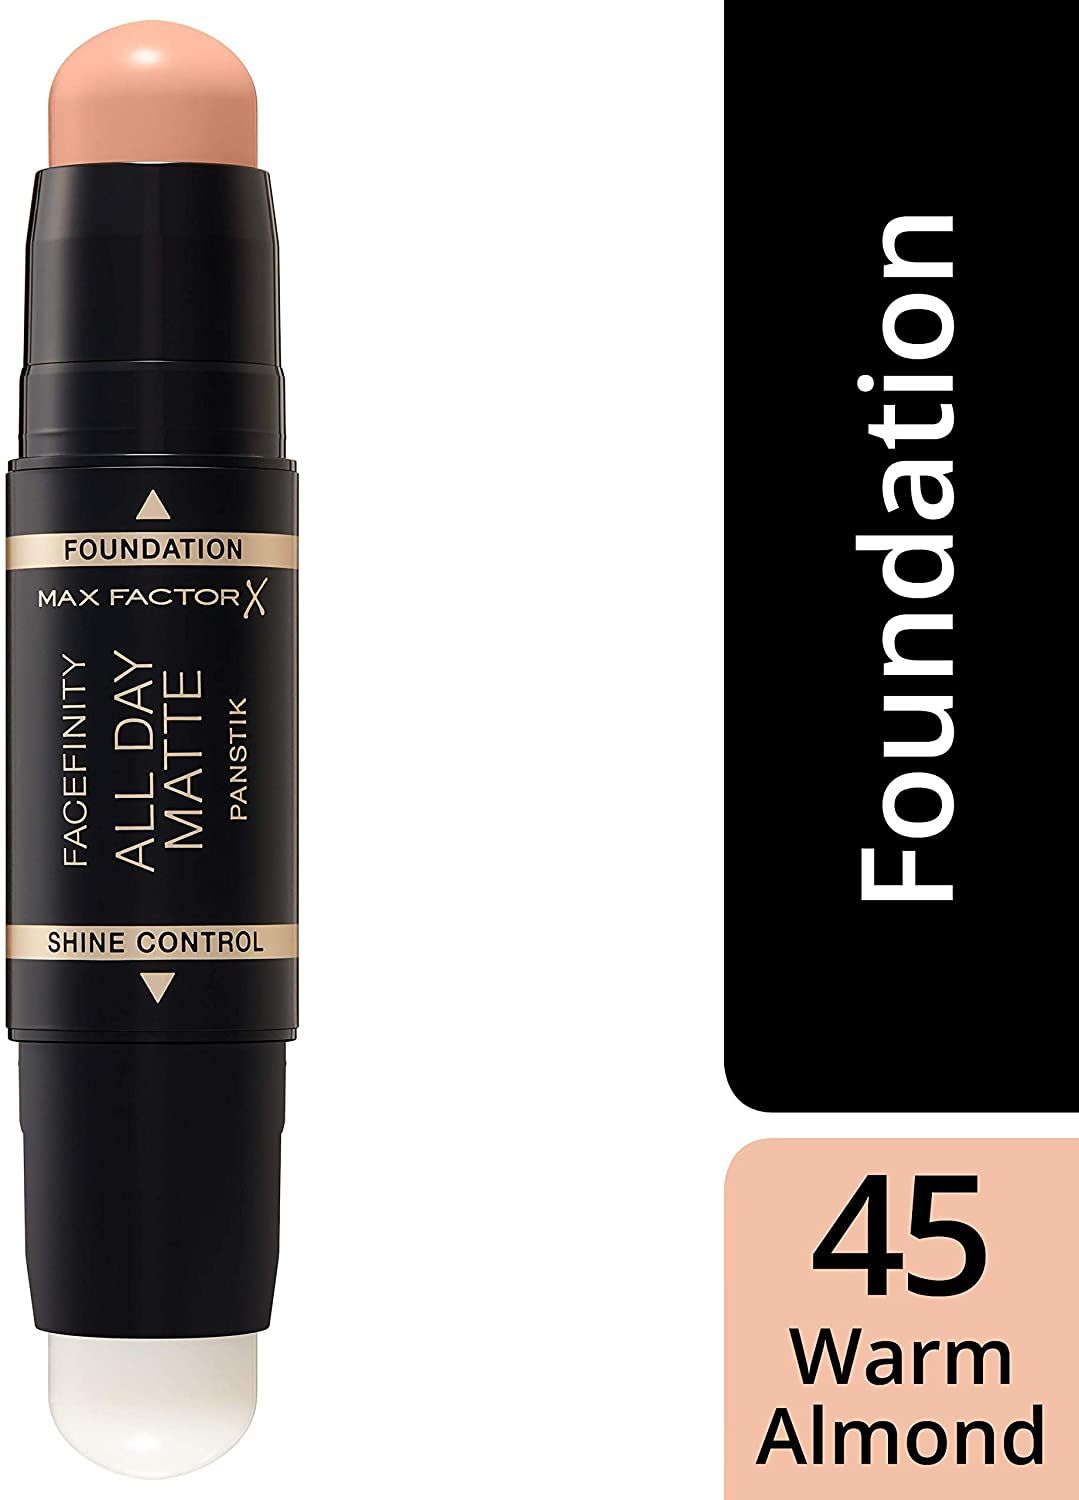 Max Factor Facefinity All Day Matte Panstik gives you full matte coverage with less effort and is perfect for on the go. The 2-in-1 stick contains 2 sides which can be used together or separately and includes a foundation and mattifying and pore-minimizing primer. The Panstik foundation is a long wear and full coverage foundation. The formula has a touch-proof technology and is designed to stay fresh and matte all day without the need to touch-up. Its full coverage effectively covers imperfections, dark circles and even skin discoloration as well as hyperpigmentation, without looking cakey. Its ultra-creamy texture glides and melts at the touch of skin for a smooth and velvety coverage which feels lightweight, while the round-shaped bullet allows for a precise application.